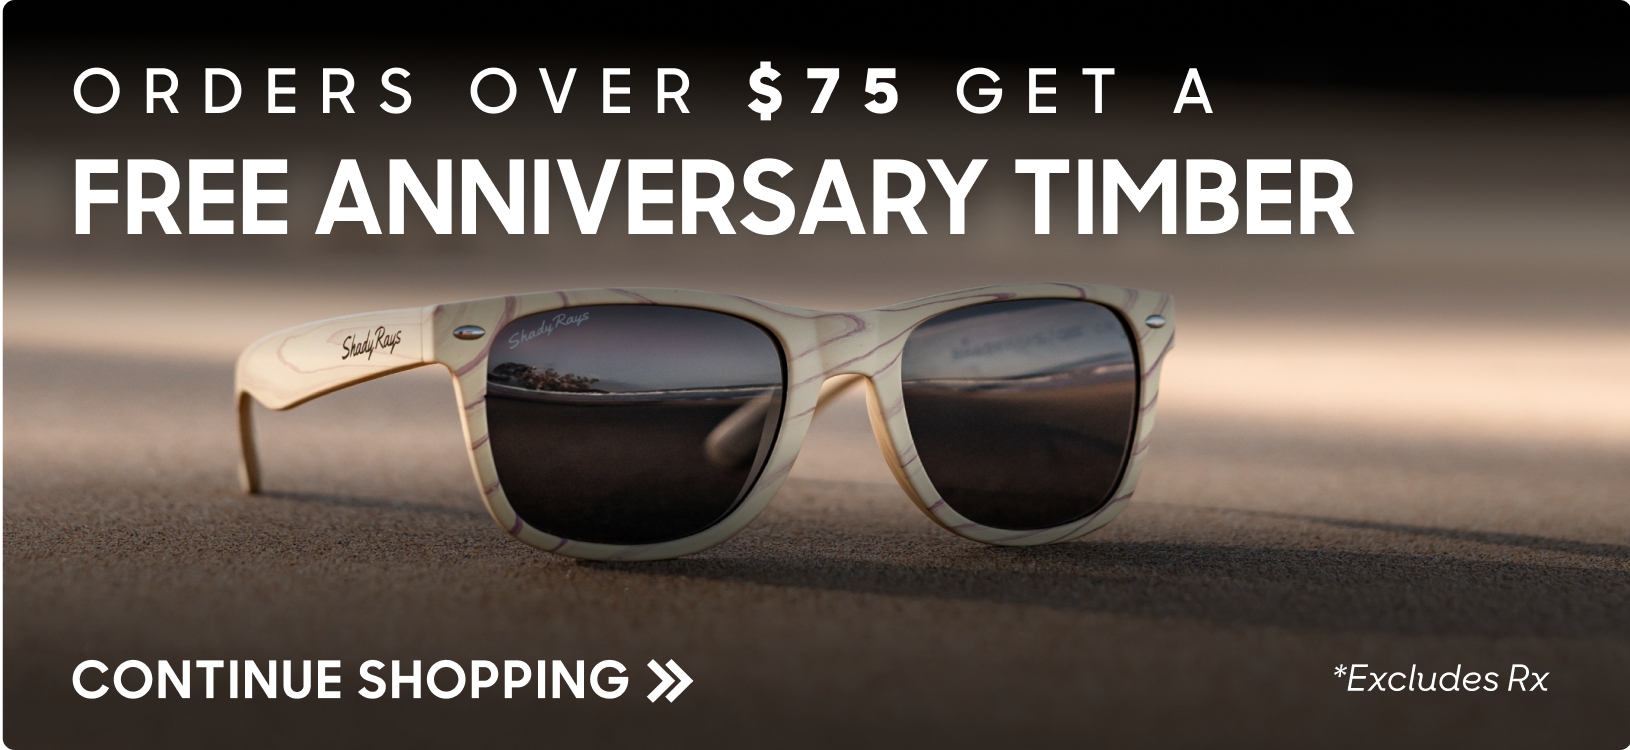 Order over $75 Get a FREE Anniversary Timber, Continue Shopping